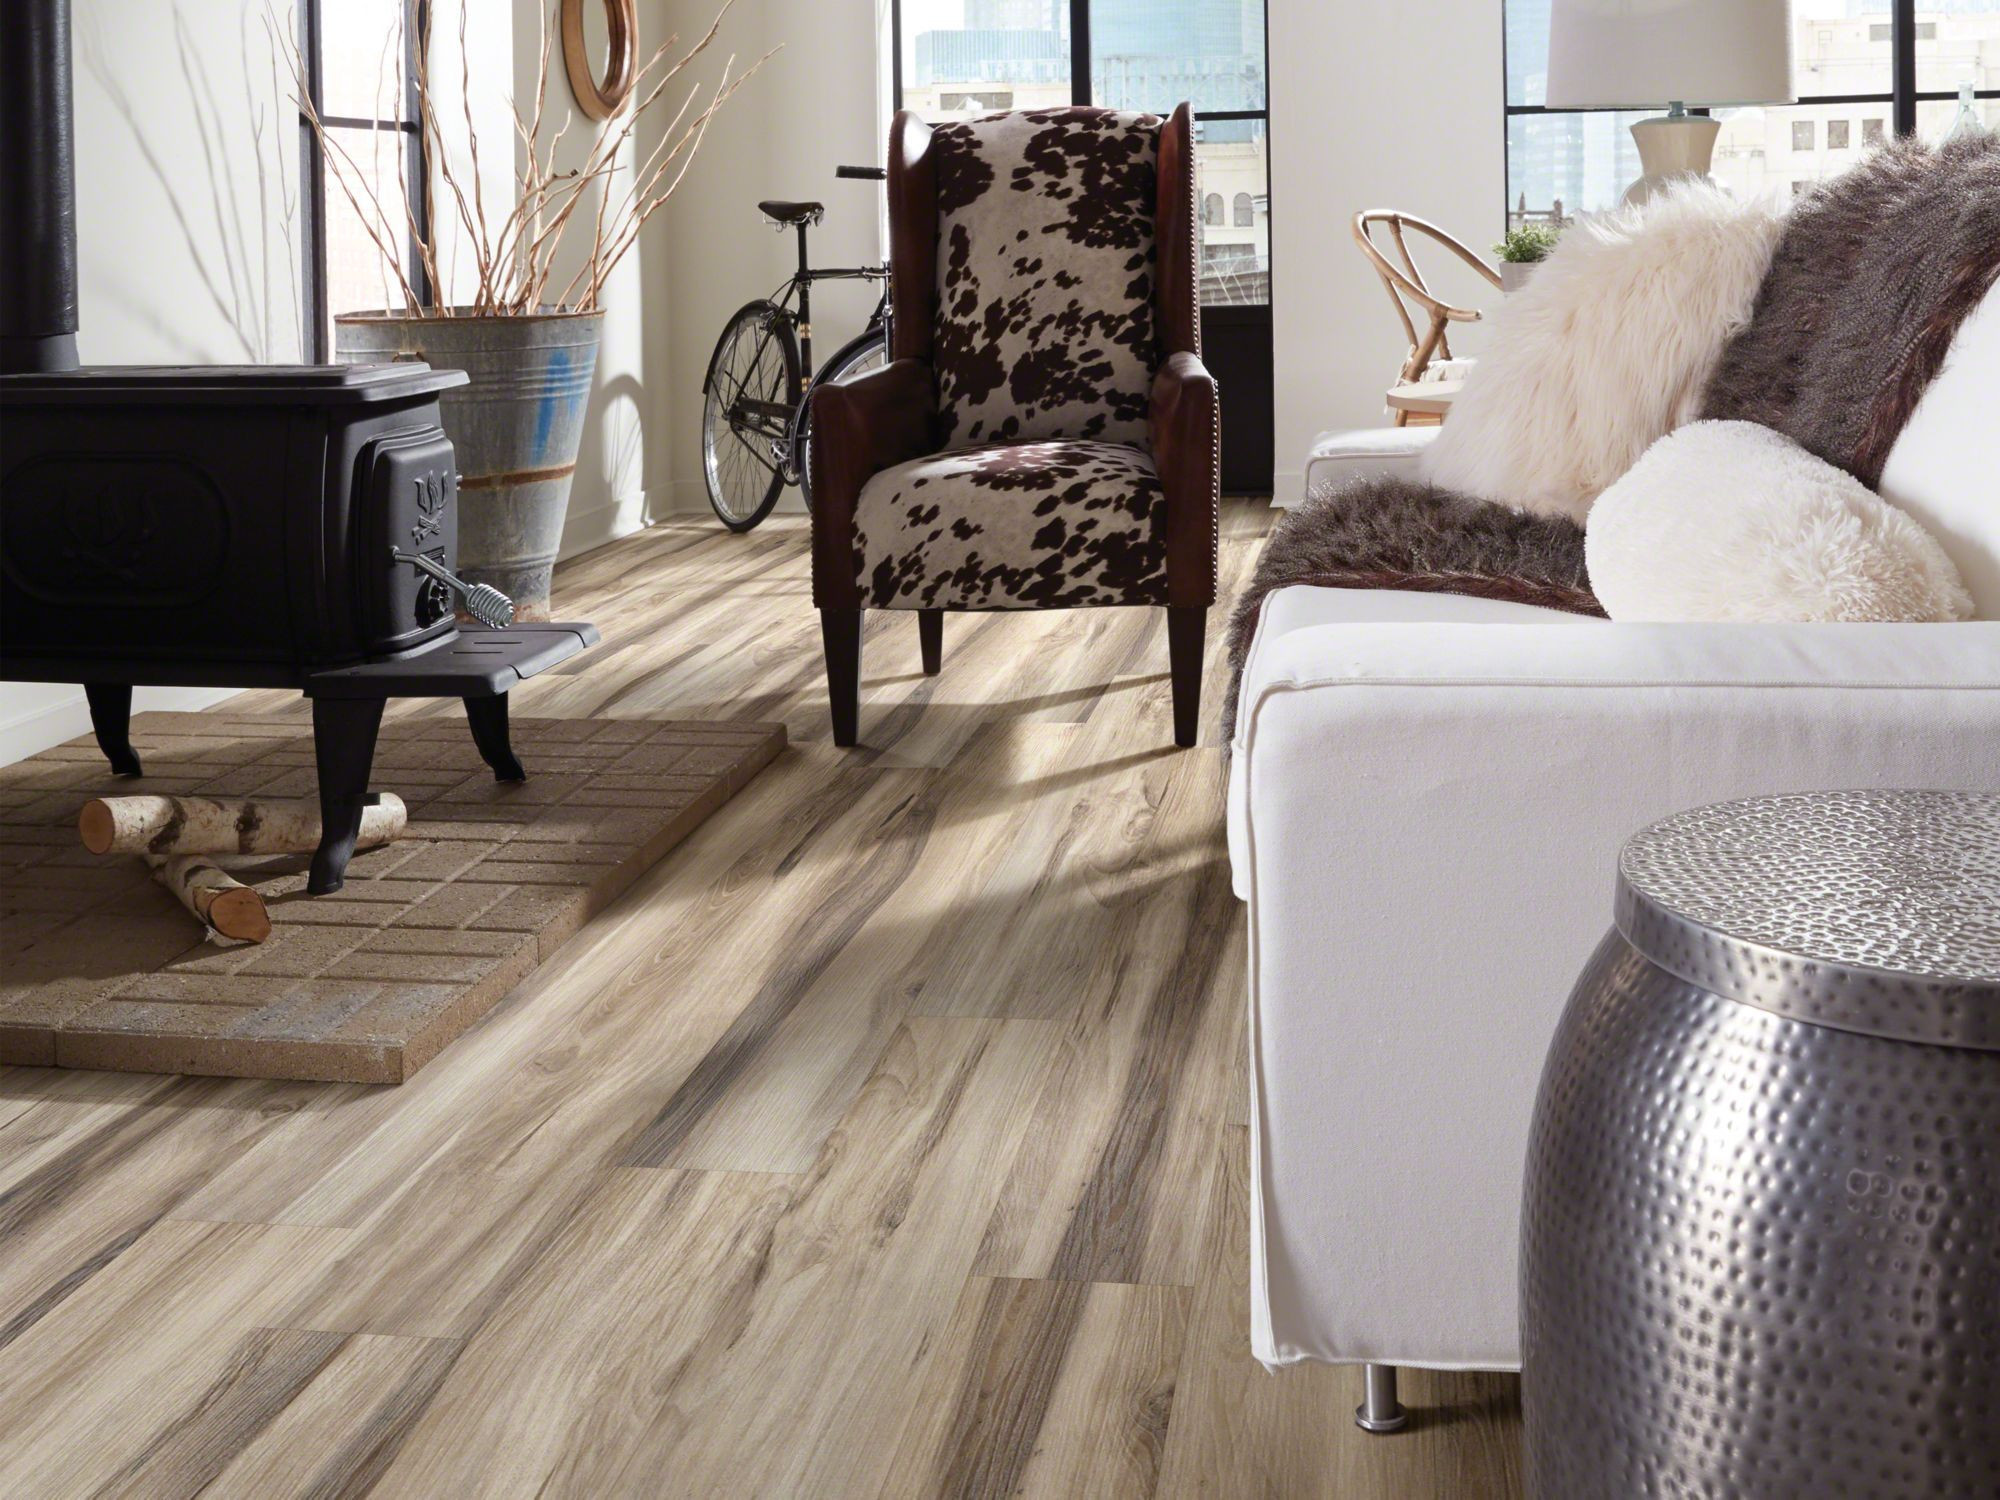 28 attractive Hardwood Floor Patterns Ideas 2024 free download hardwood floor patterns ideas of sa608 00526 room view floor up pinterest plank room and modern throughout shaws resilient vinyl flooring is the modern choice for beautiful durable floors wi